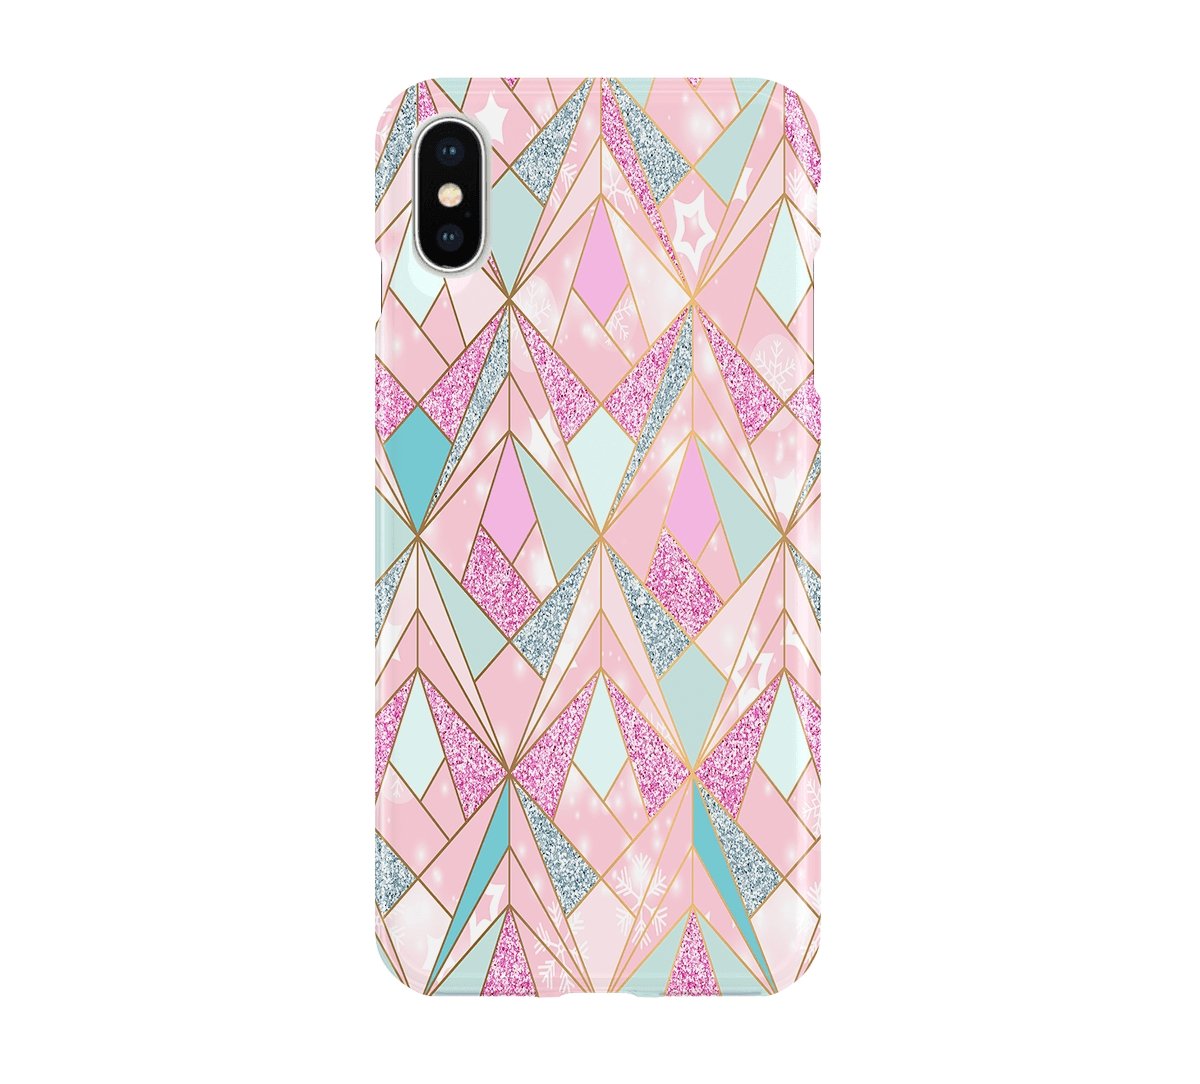 Geometric Winter - iPhone phone case designs by CaseSwagger